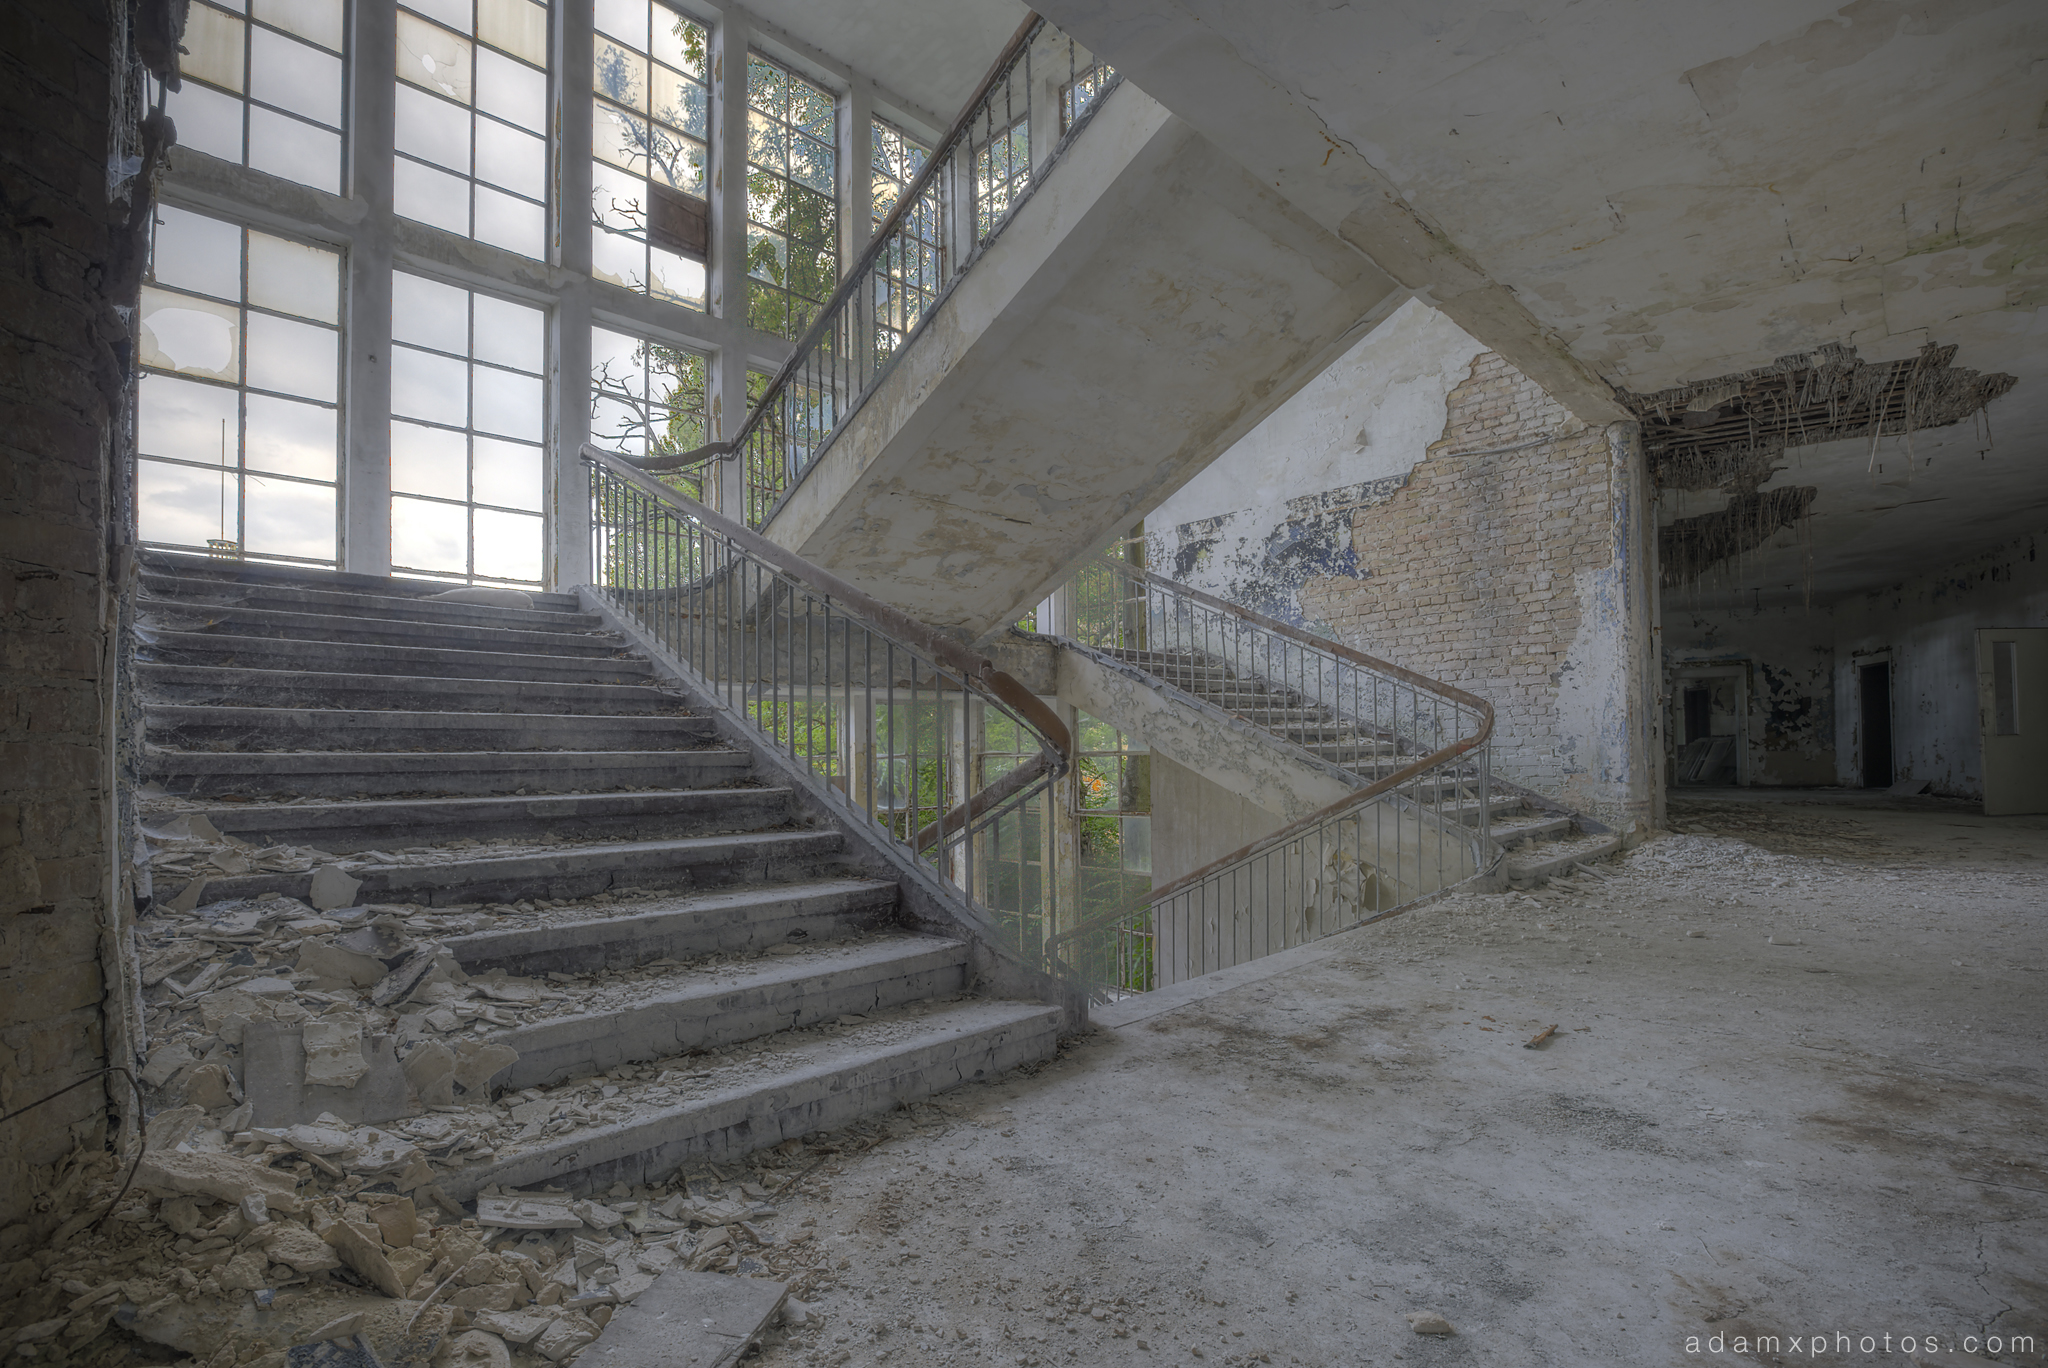 Adam X Urbex Altes Lager Juterbog Germany Urban Exploration Air base flight school CCCP Soviet Russian military Decay Lost Abandoned Derelict Hidden main entrance foyer split staircase stairs twin